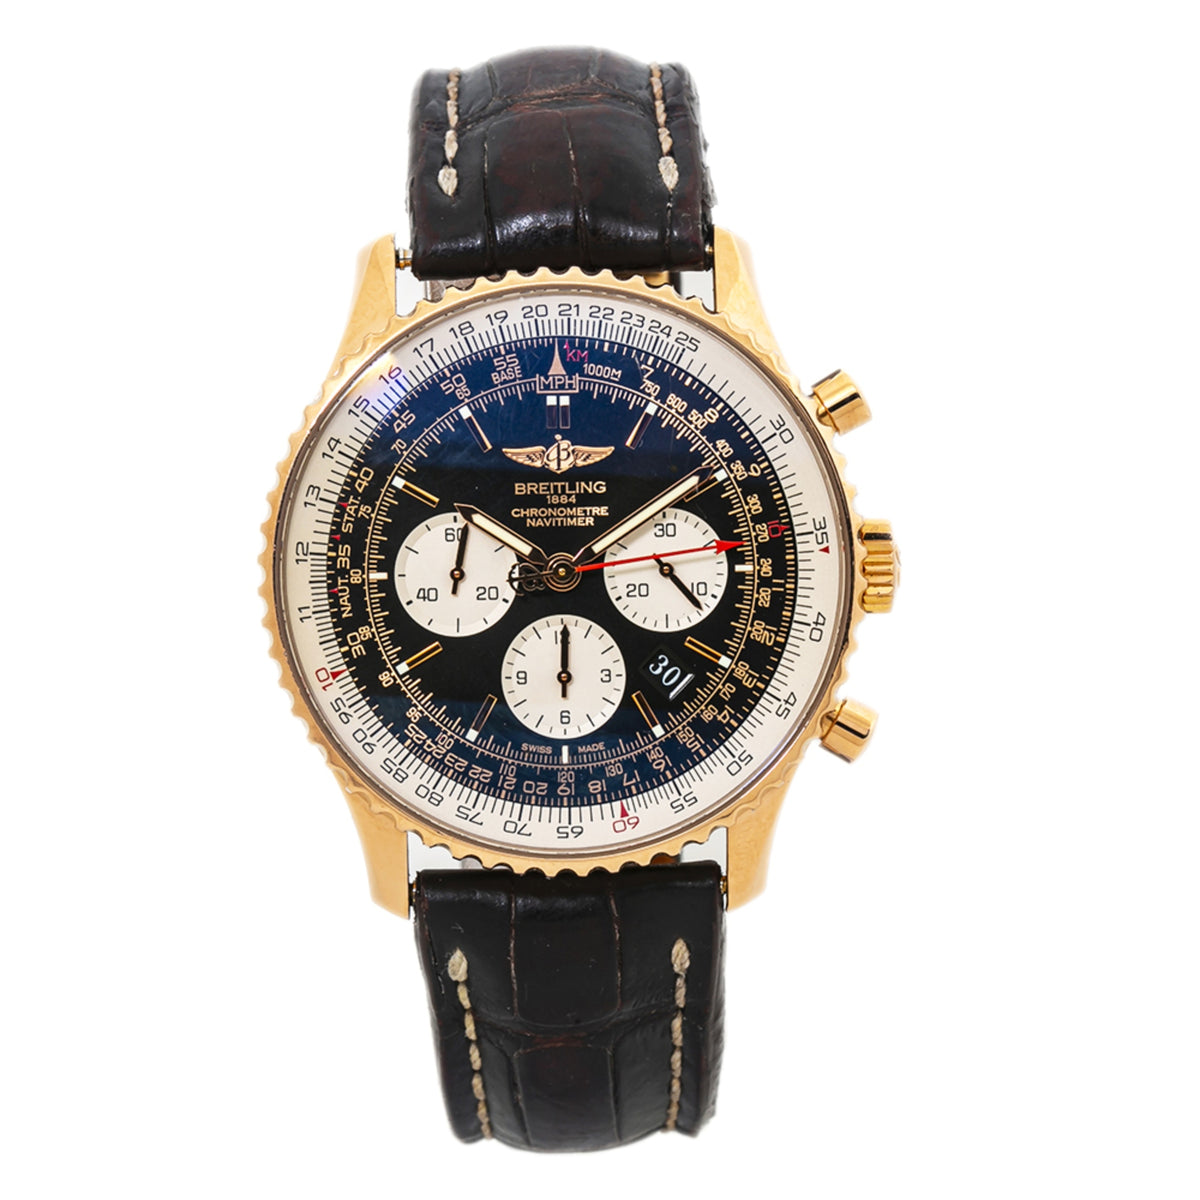 Breitling Navitimer RB0127 Limited 18k Rose Automatic Watch GMT Chronograph 46mm